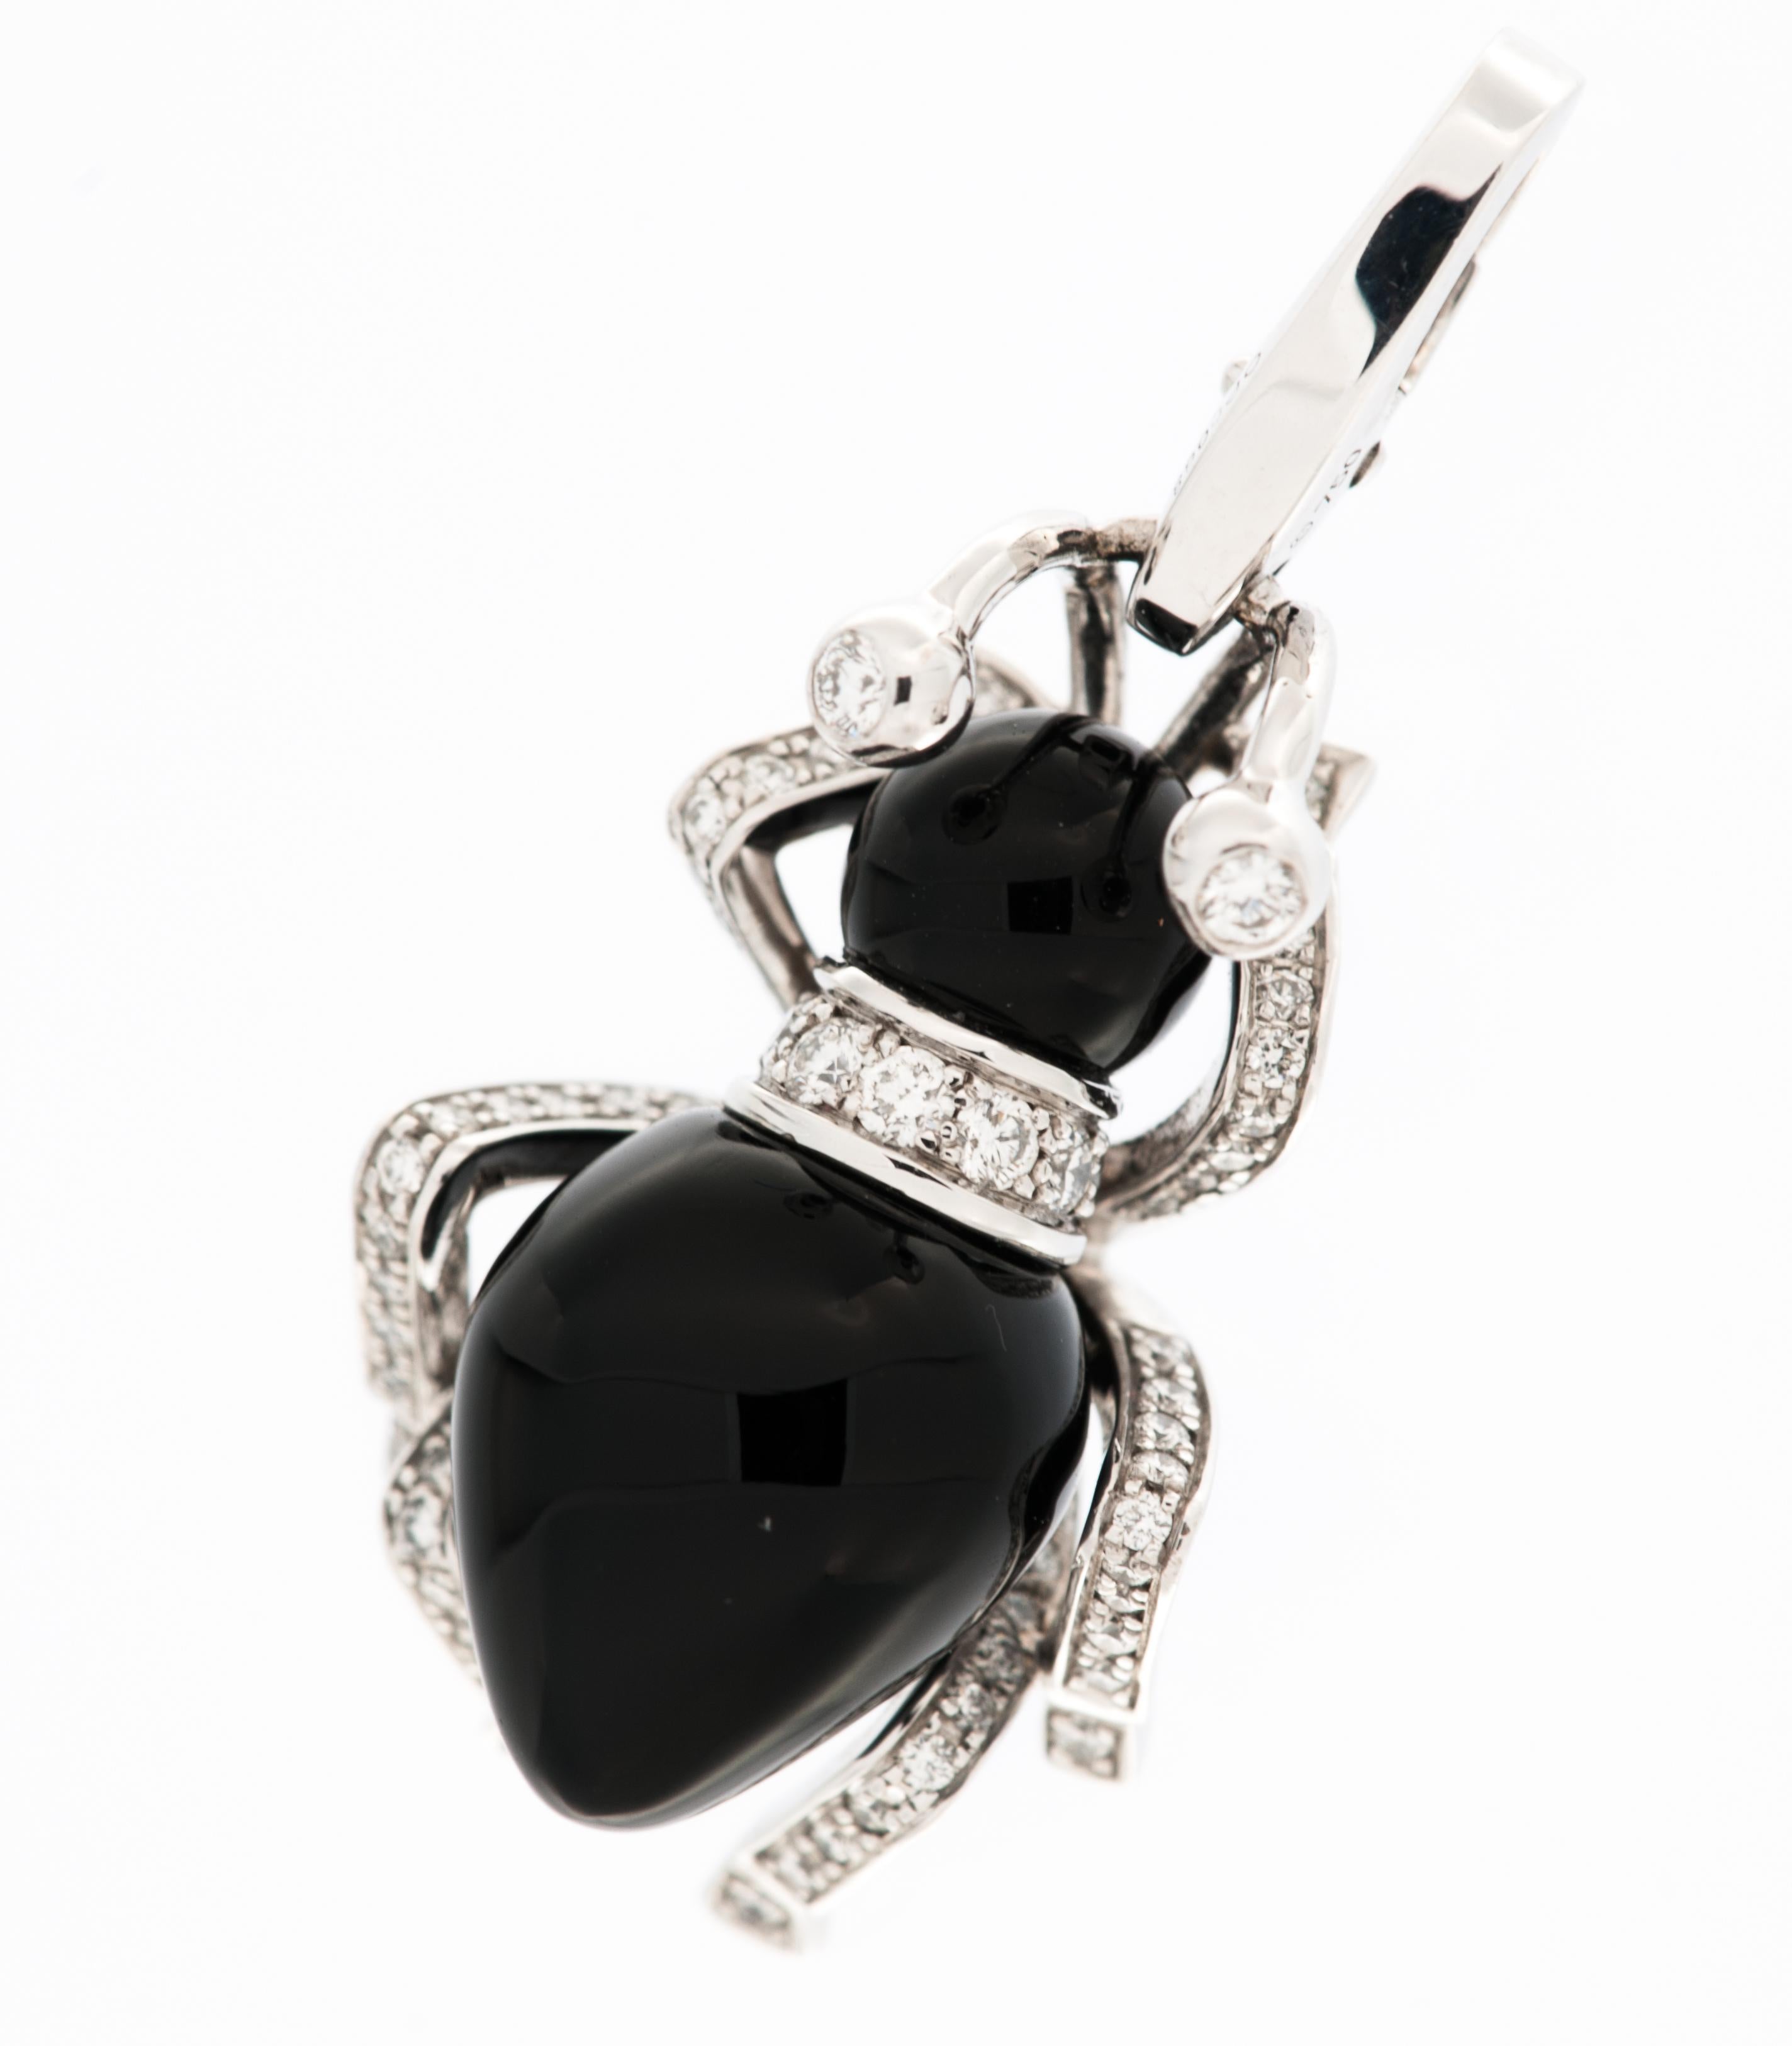 The Cartier Limited Edition Ant Charm with Diamonds and Onyx is a captivating and exclusive piece of jewelry that combines playful charm with luxurious craftsmanship.

Crafted by the renowned house of Cartier, the charm is designed in the shape of